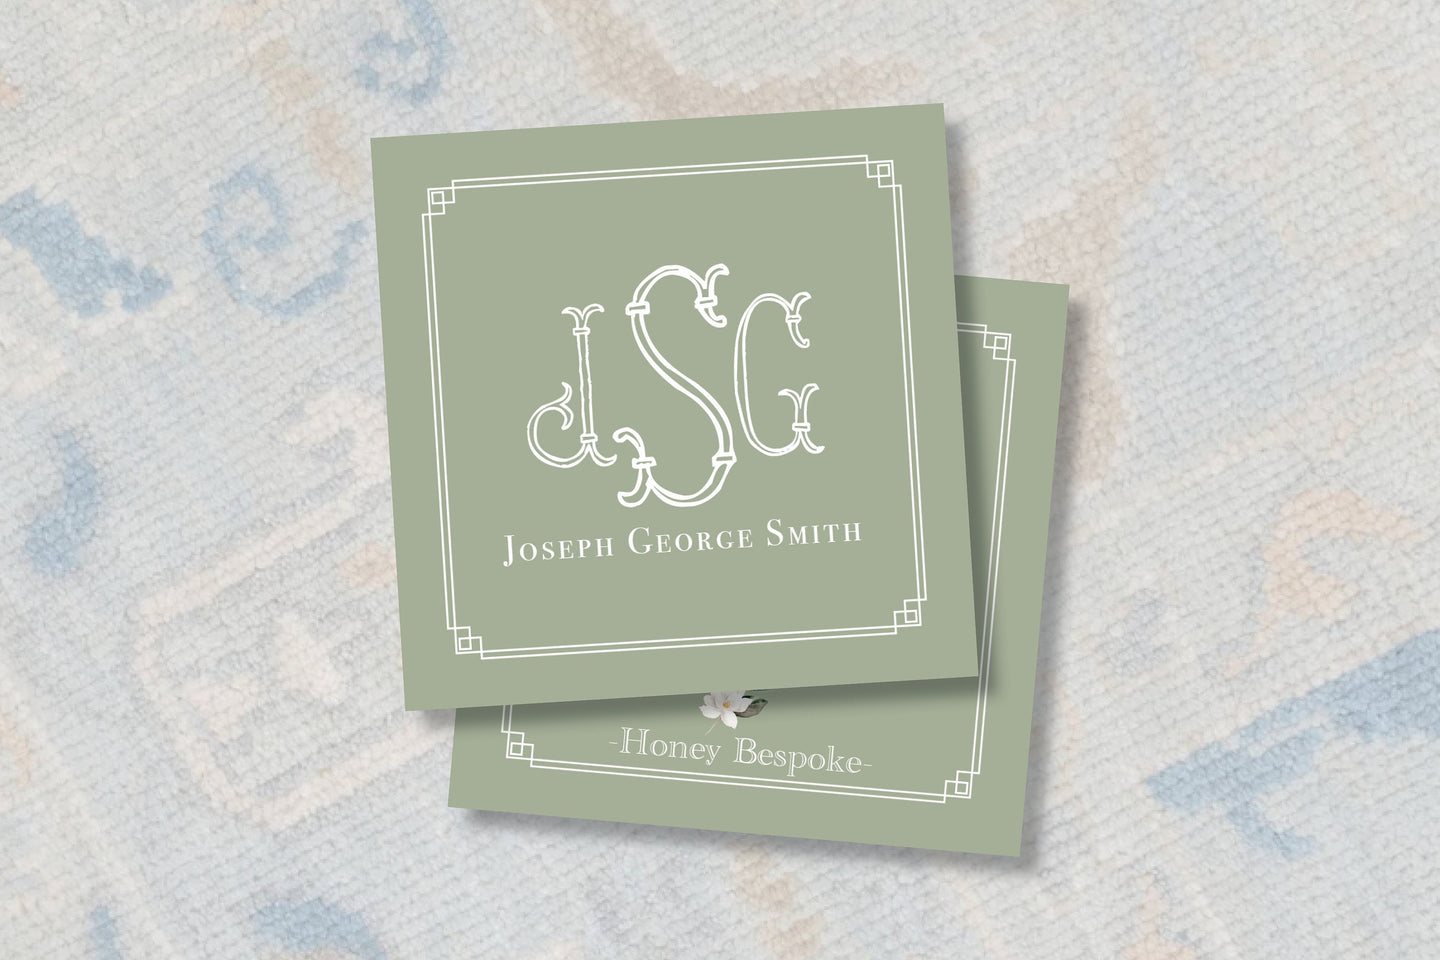 Personalized Monogram Gift Tag / Green Enclosure Card / Gift Tags Boys / Preppy Boy / Southern Boy Designs / Calling Cards For Boys